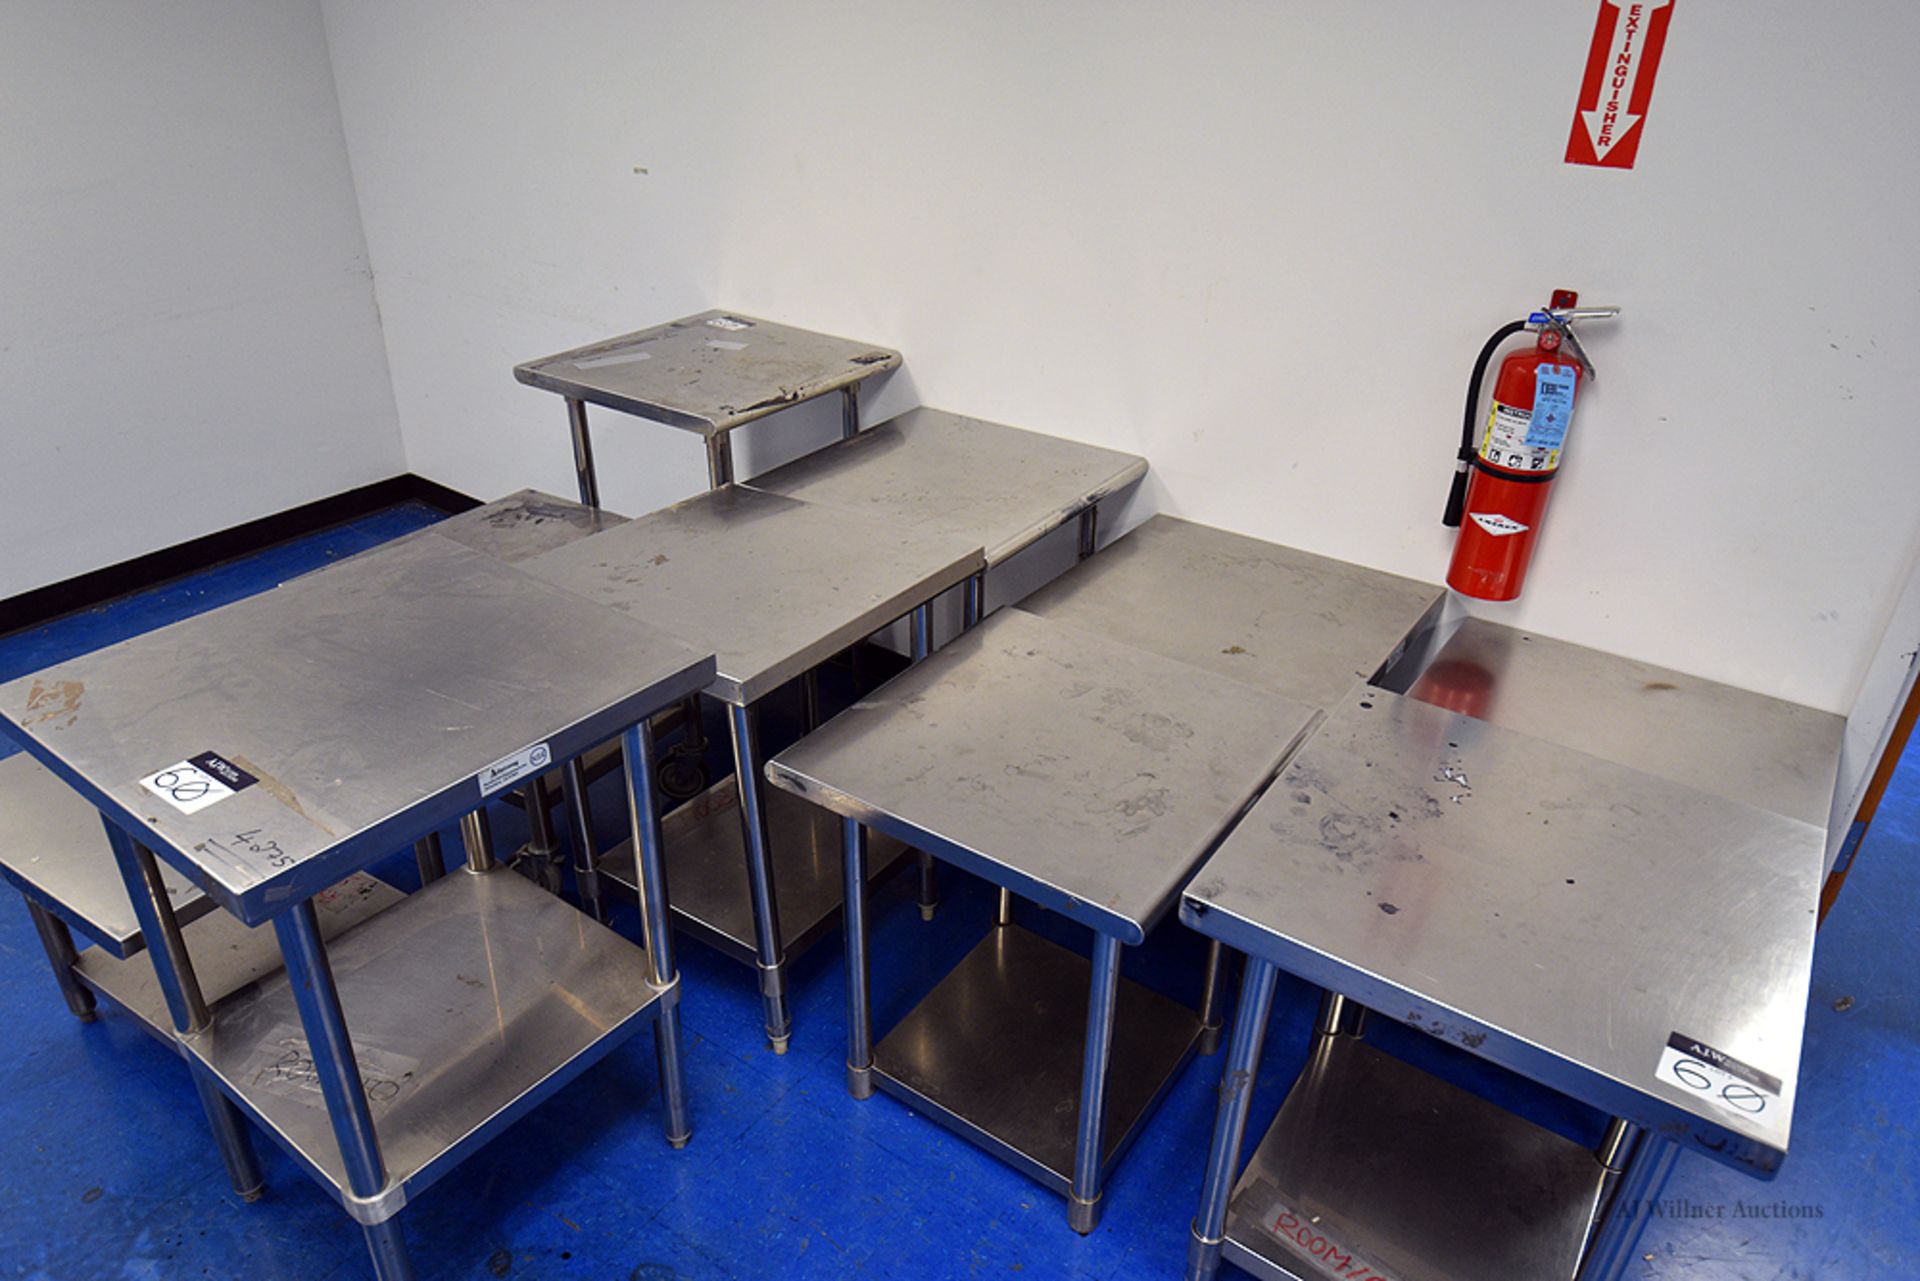 24"x24" Stainless Steel 2-Tier Work Tables